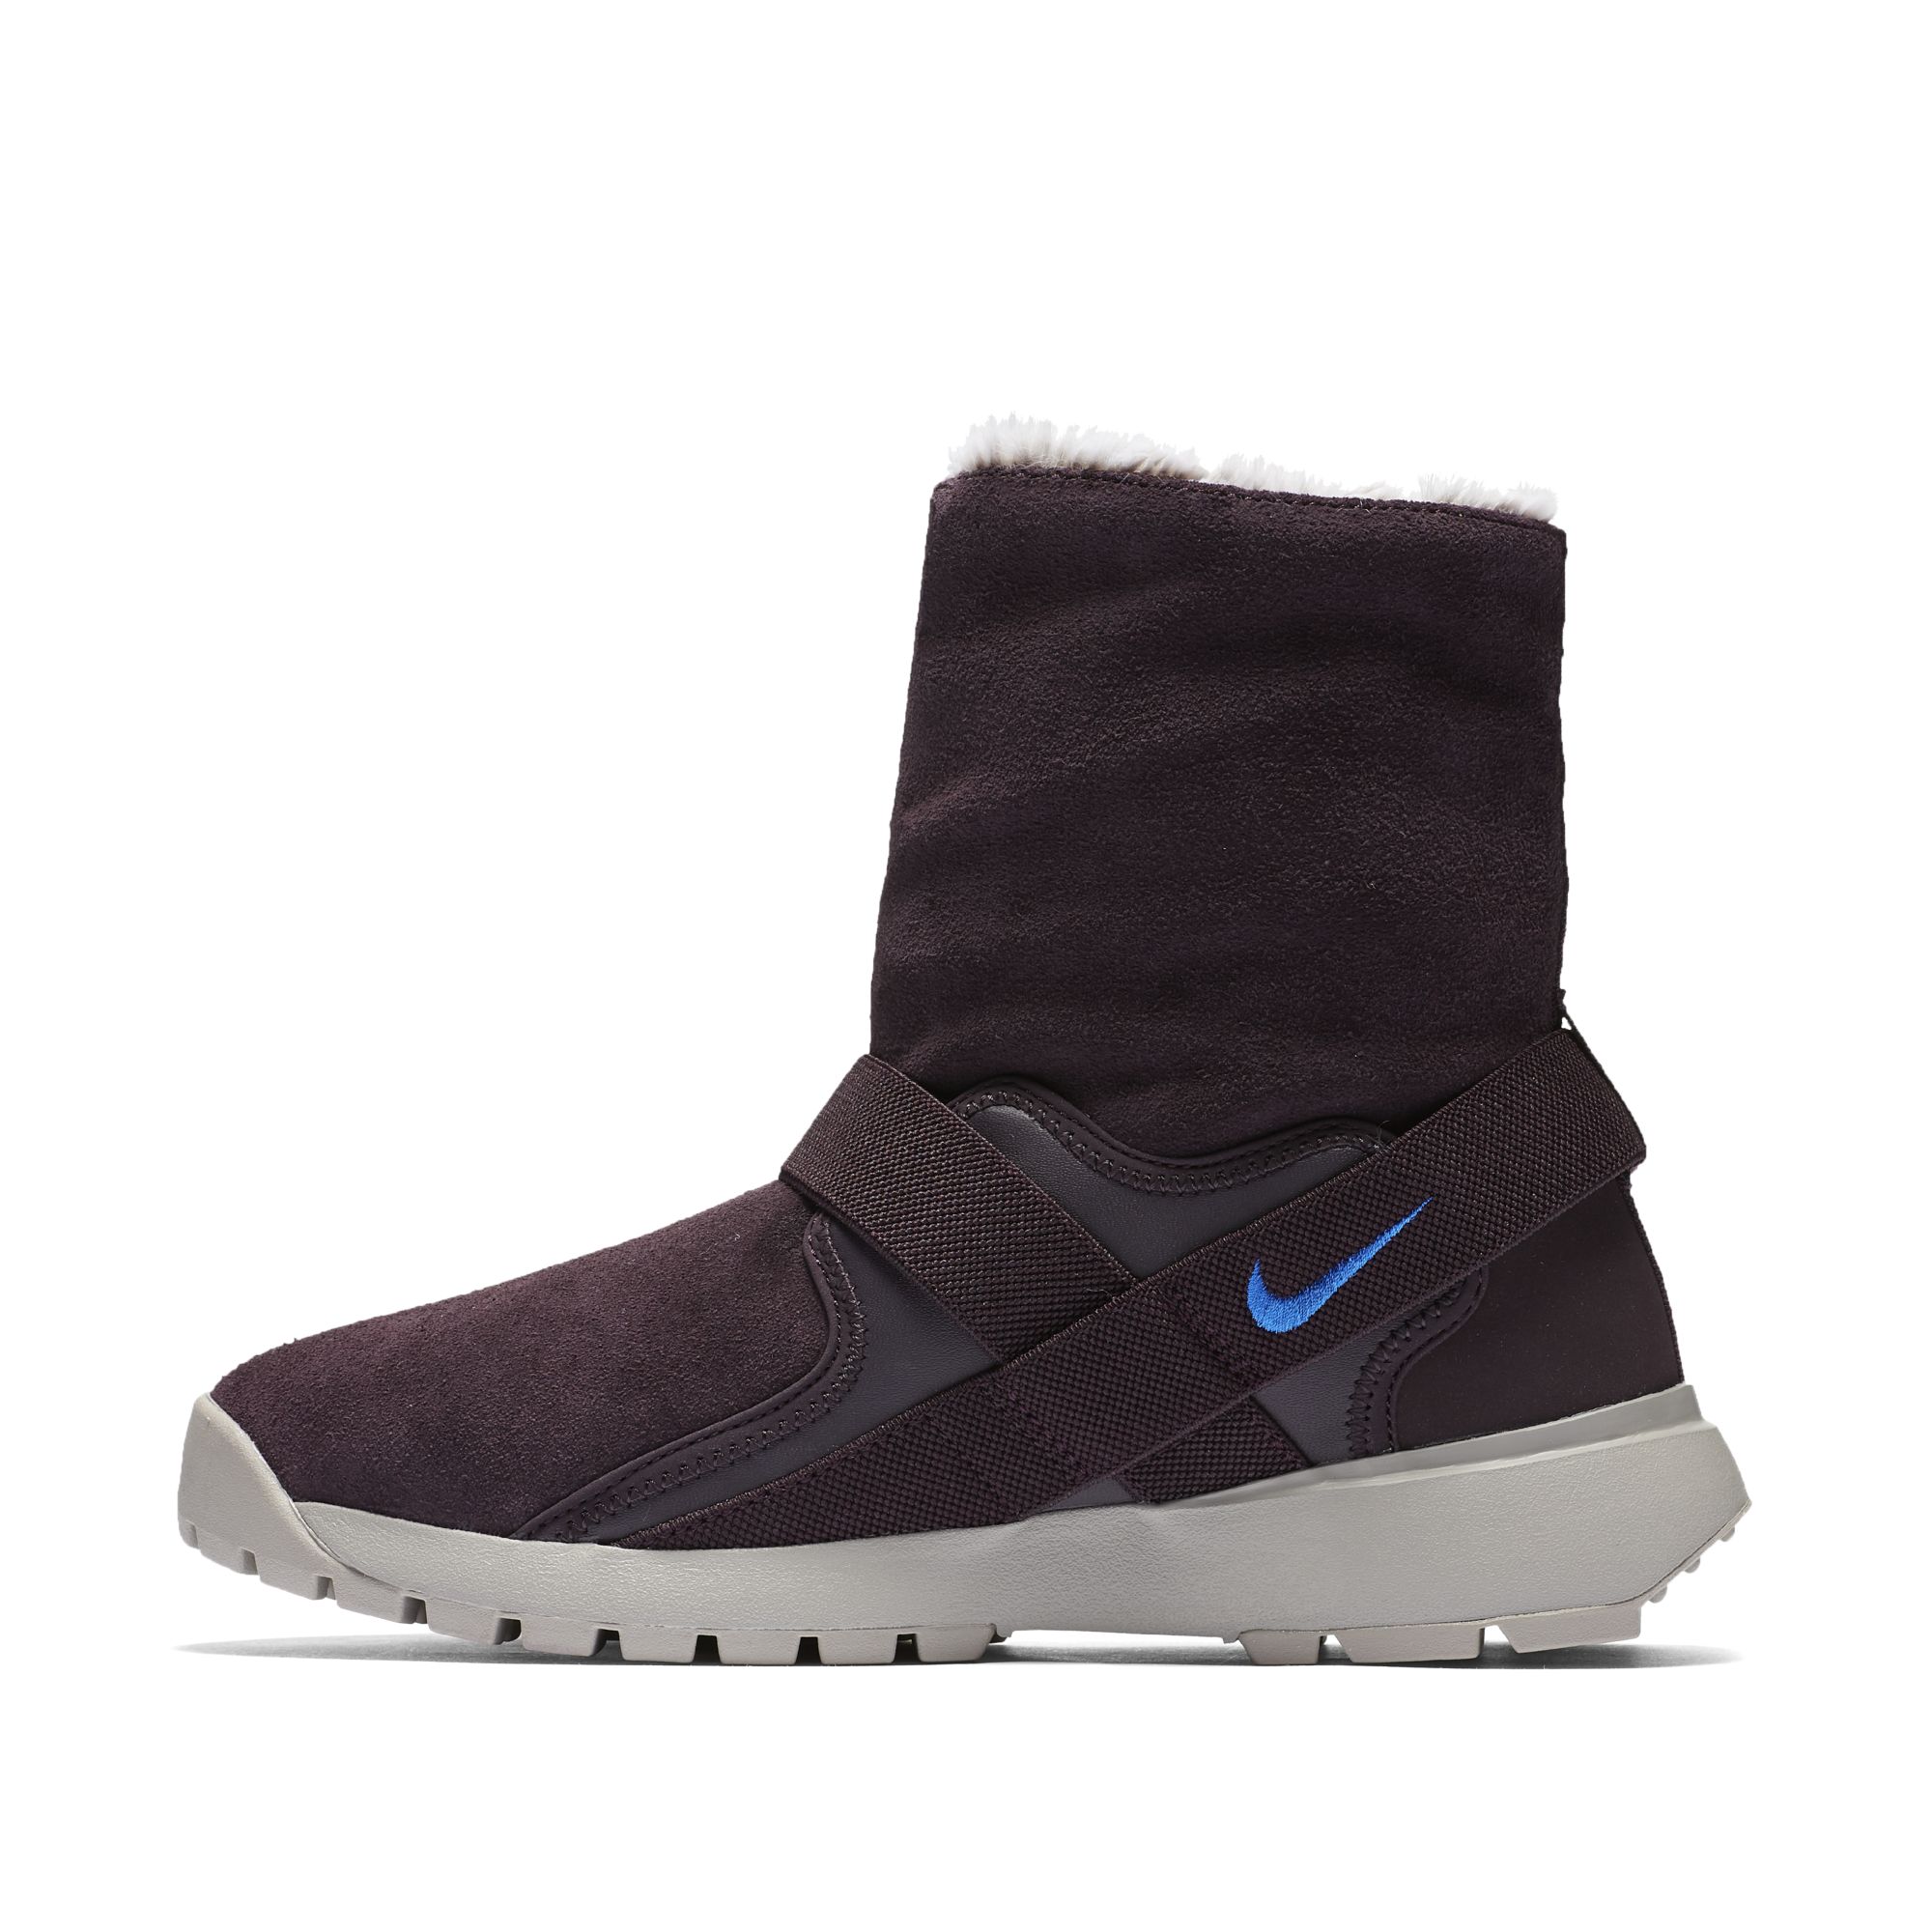 Nike Has Created its Own Ugg, the 